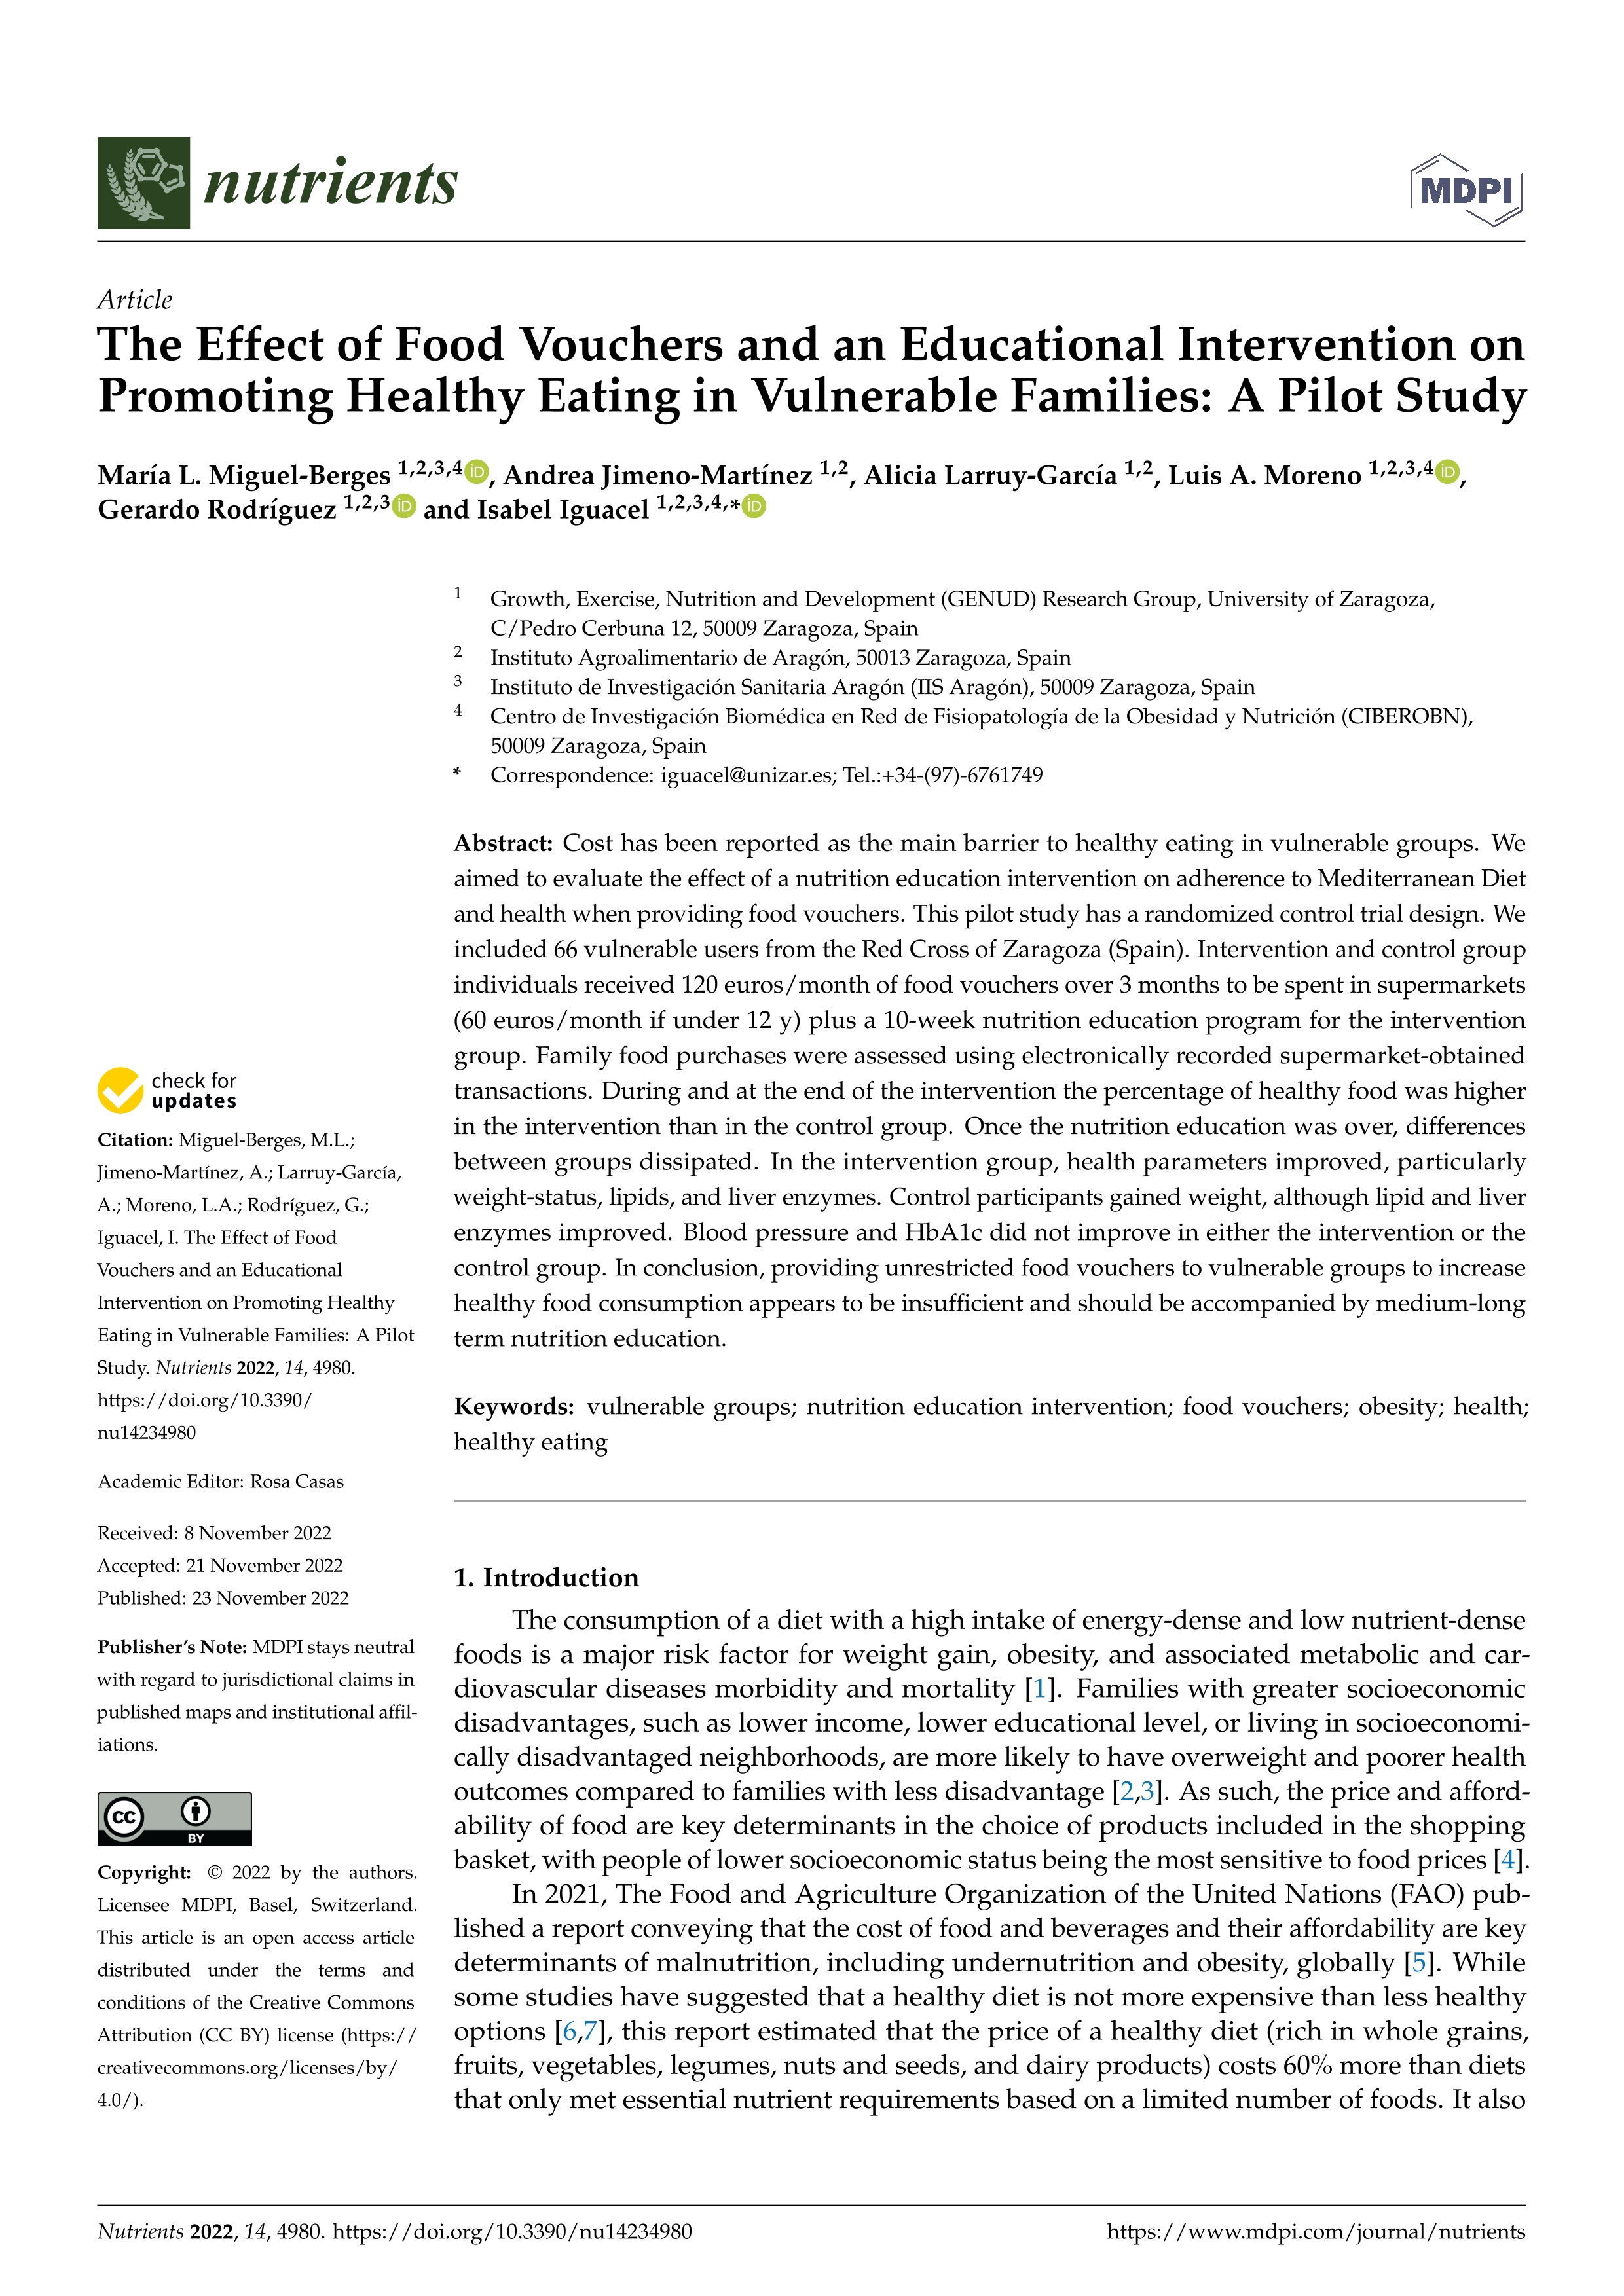 The Effect of Food Vouchers and an Educational Intervention on Promoting Healthy Eating in Vulnerable Families: A Pilot Study